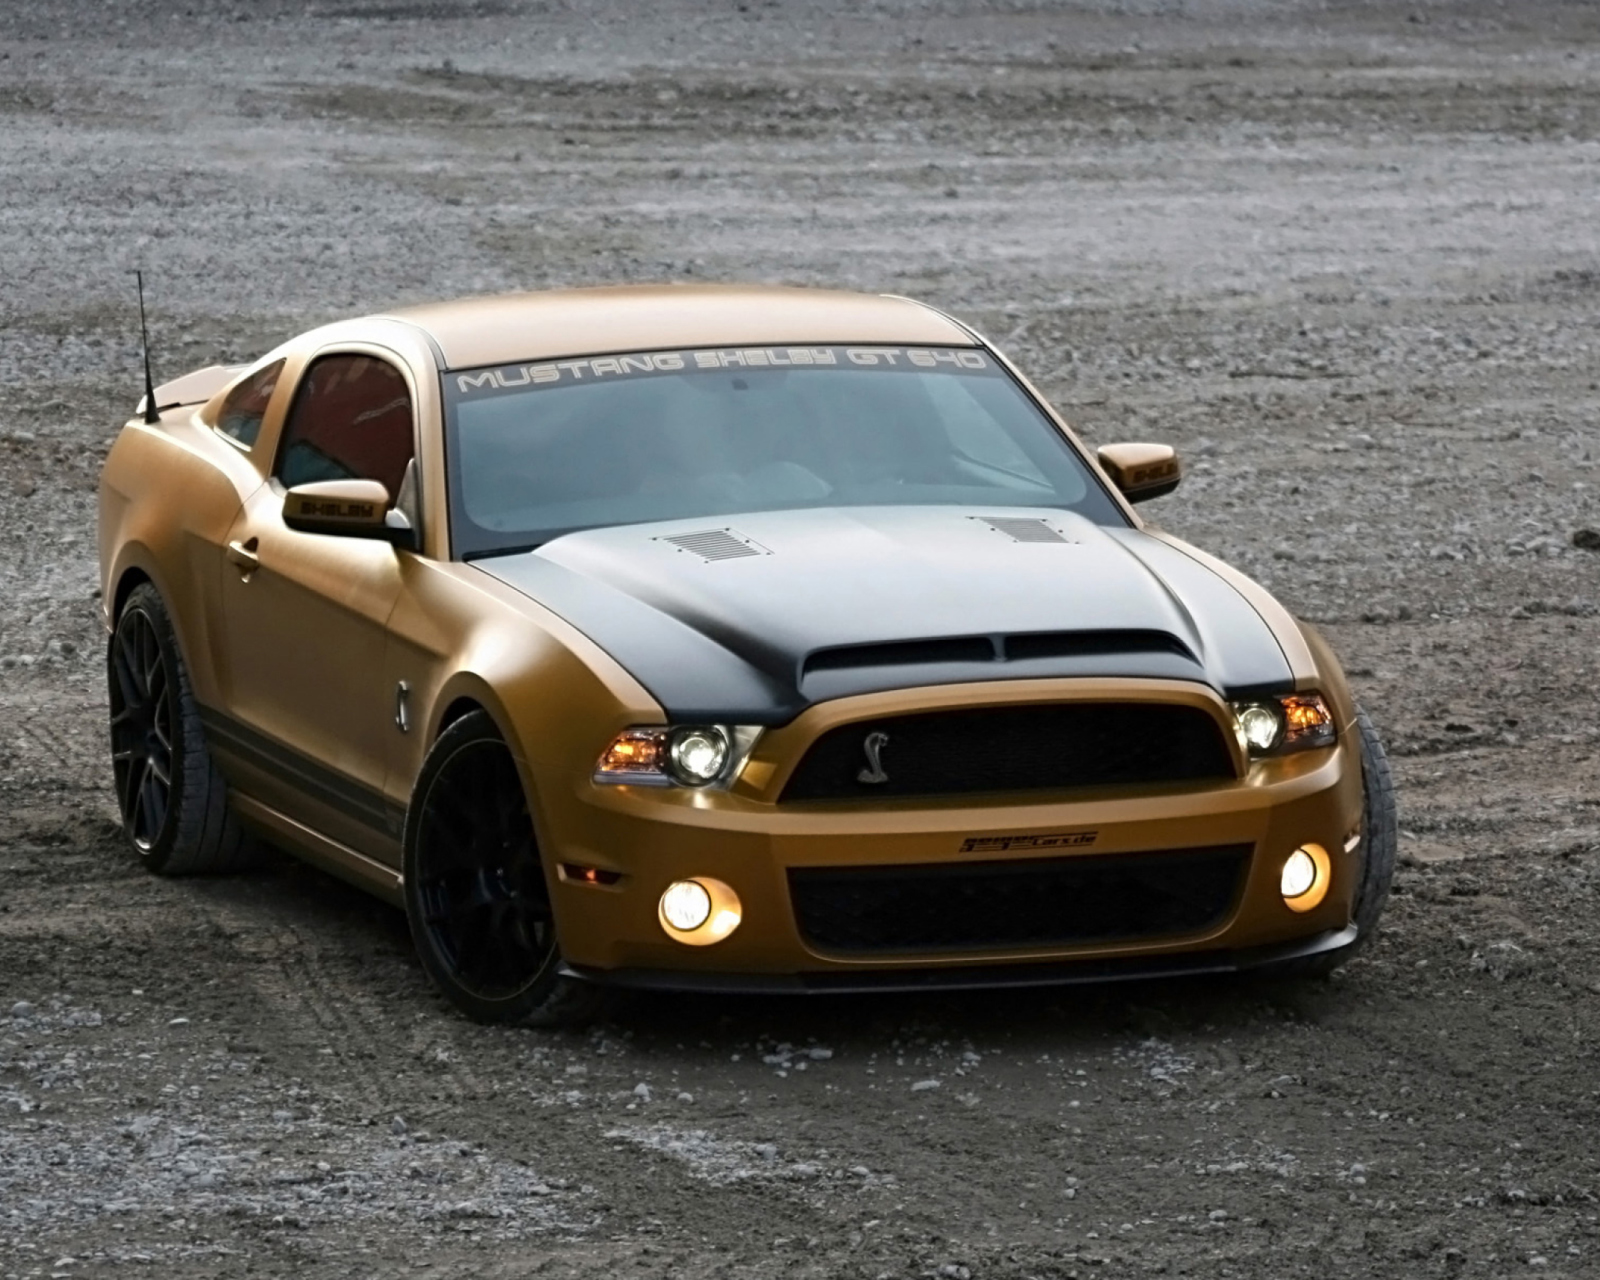 Ford Mustang Shelby GT640 wallpaper 1600x1280